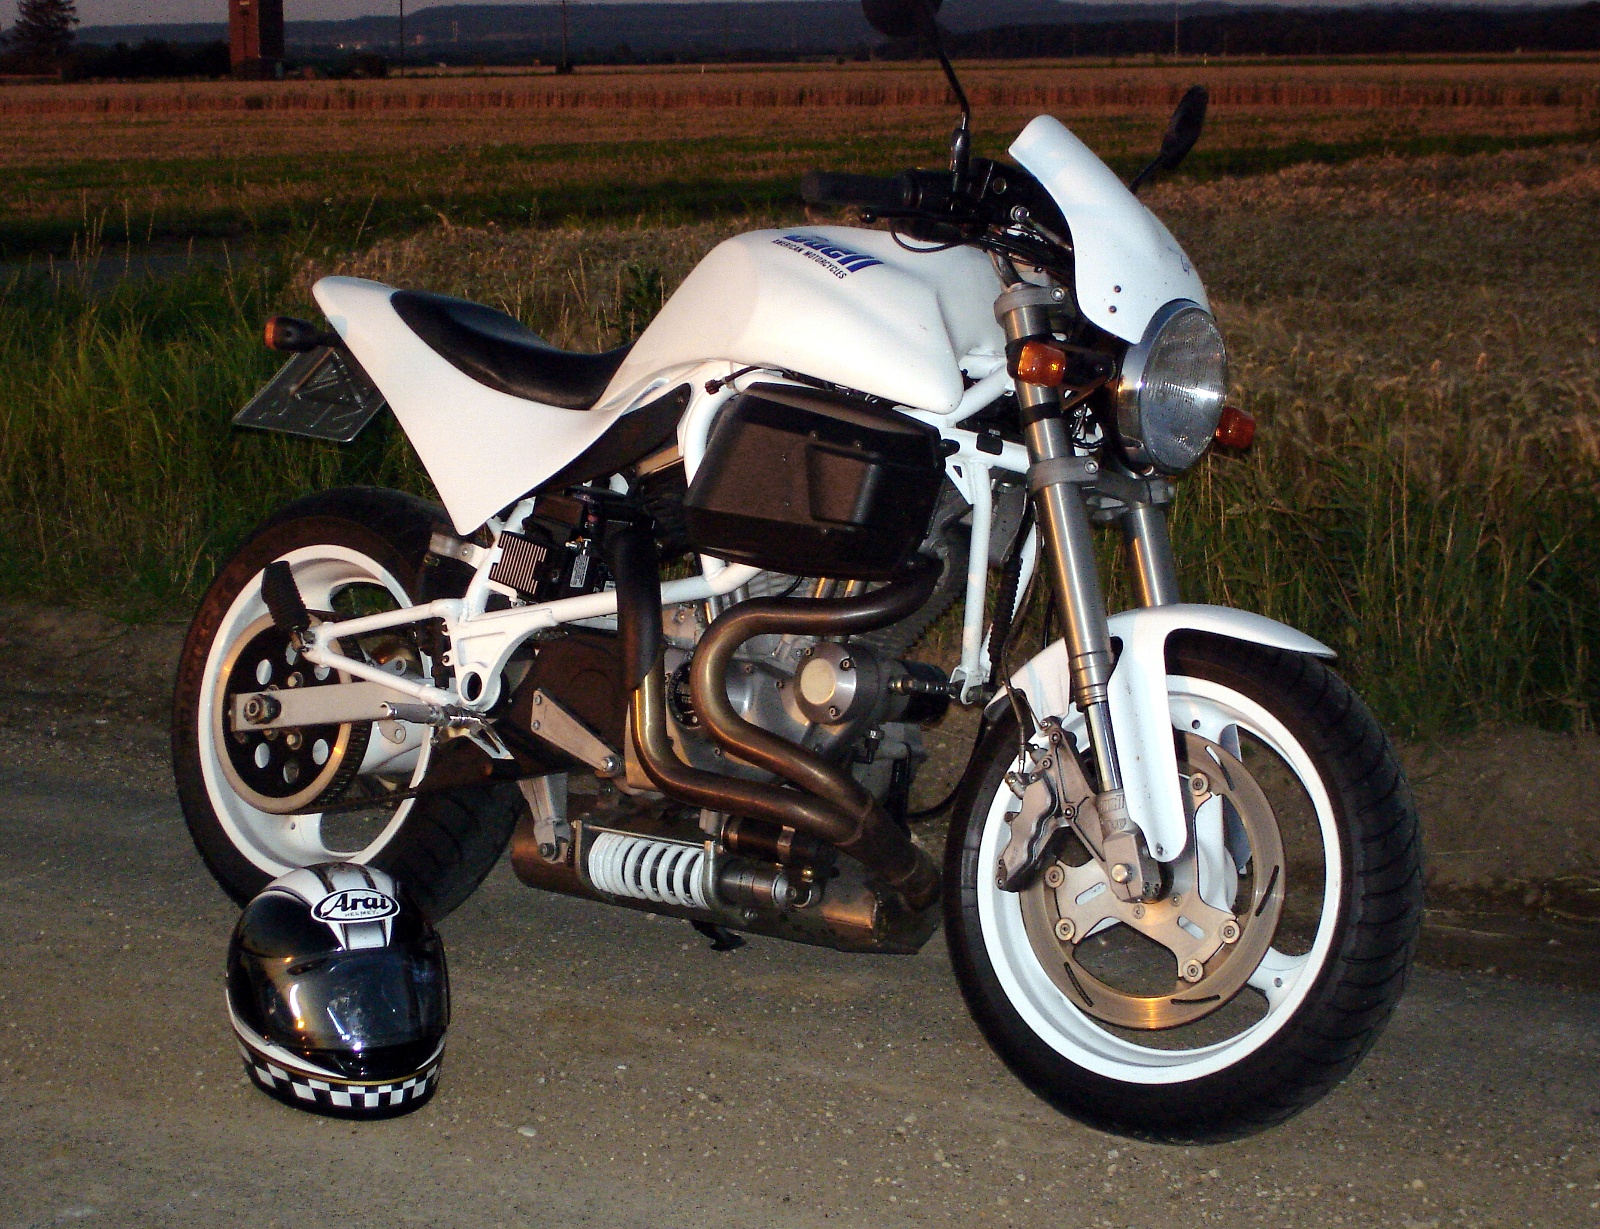 BUELL S1